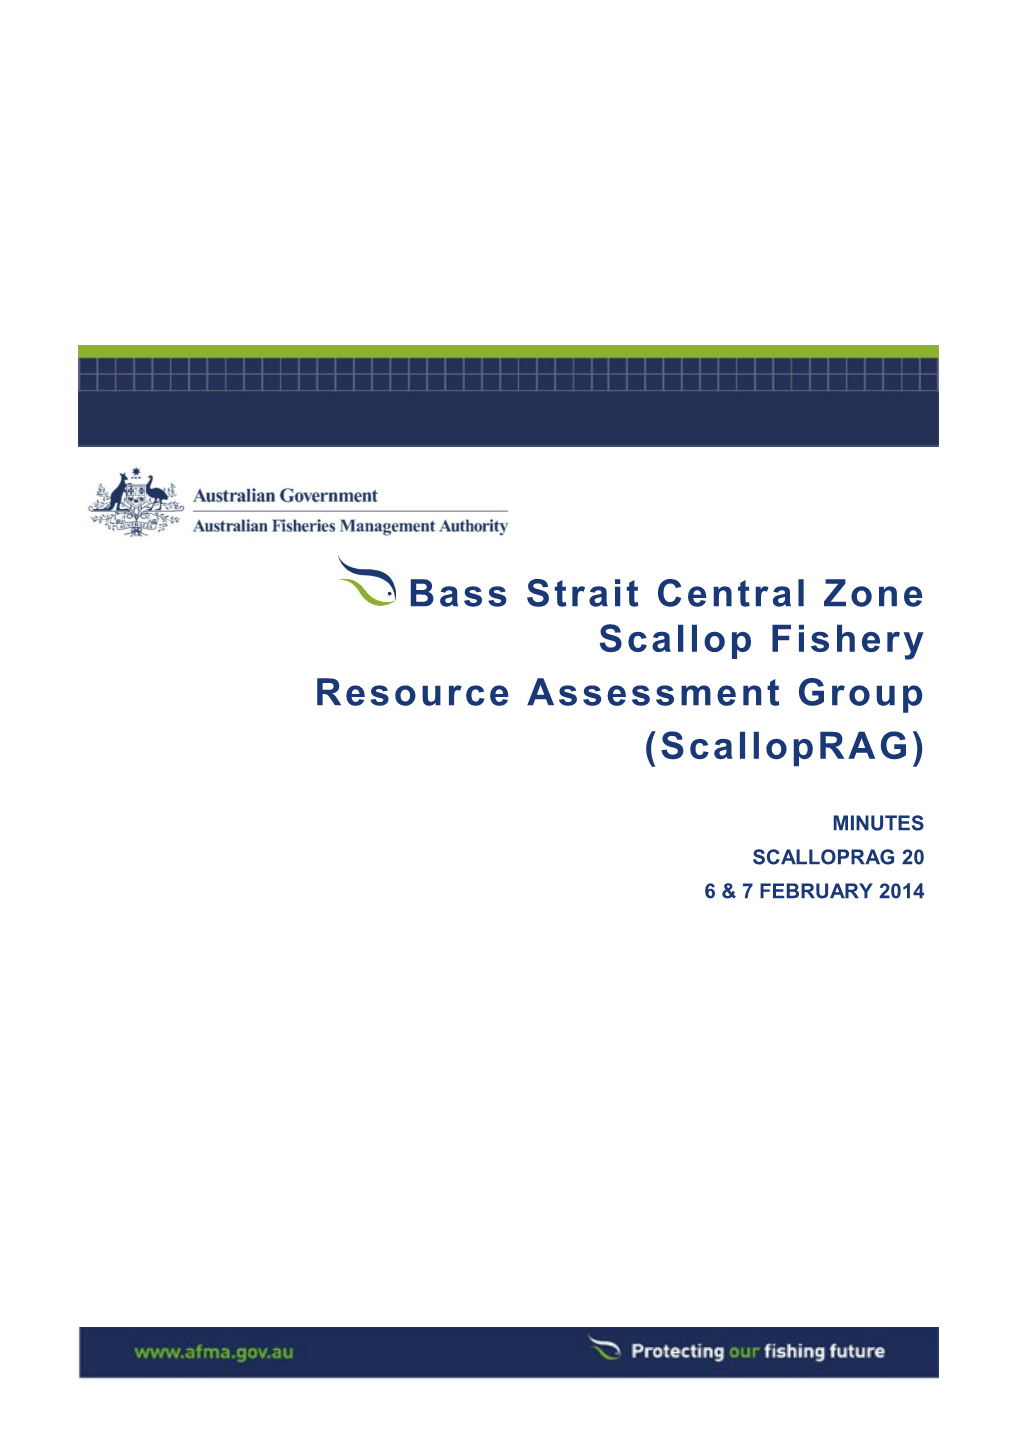 Resource Assessment Group